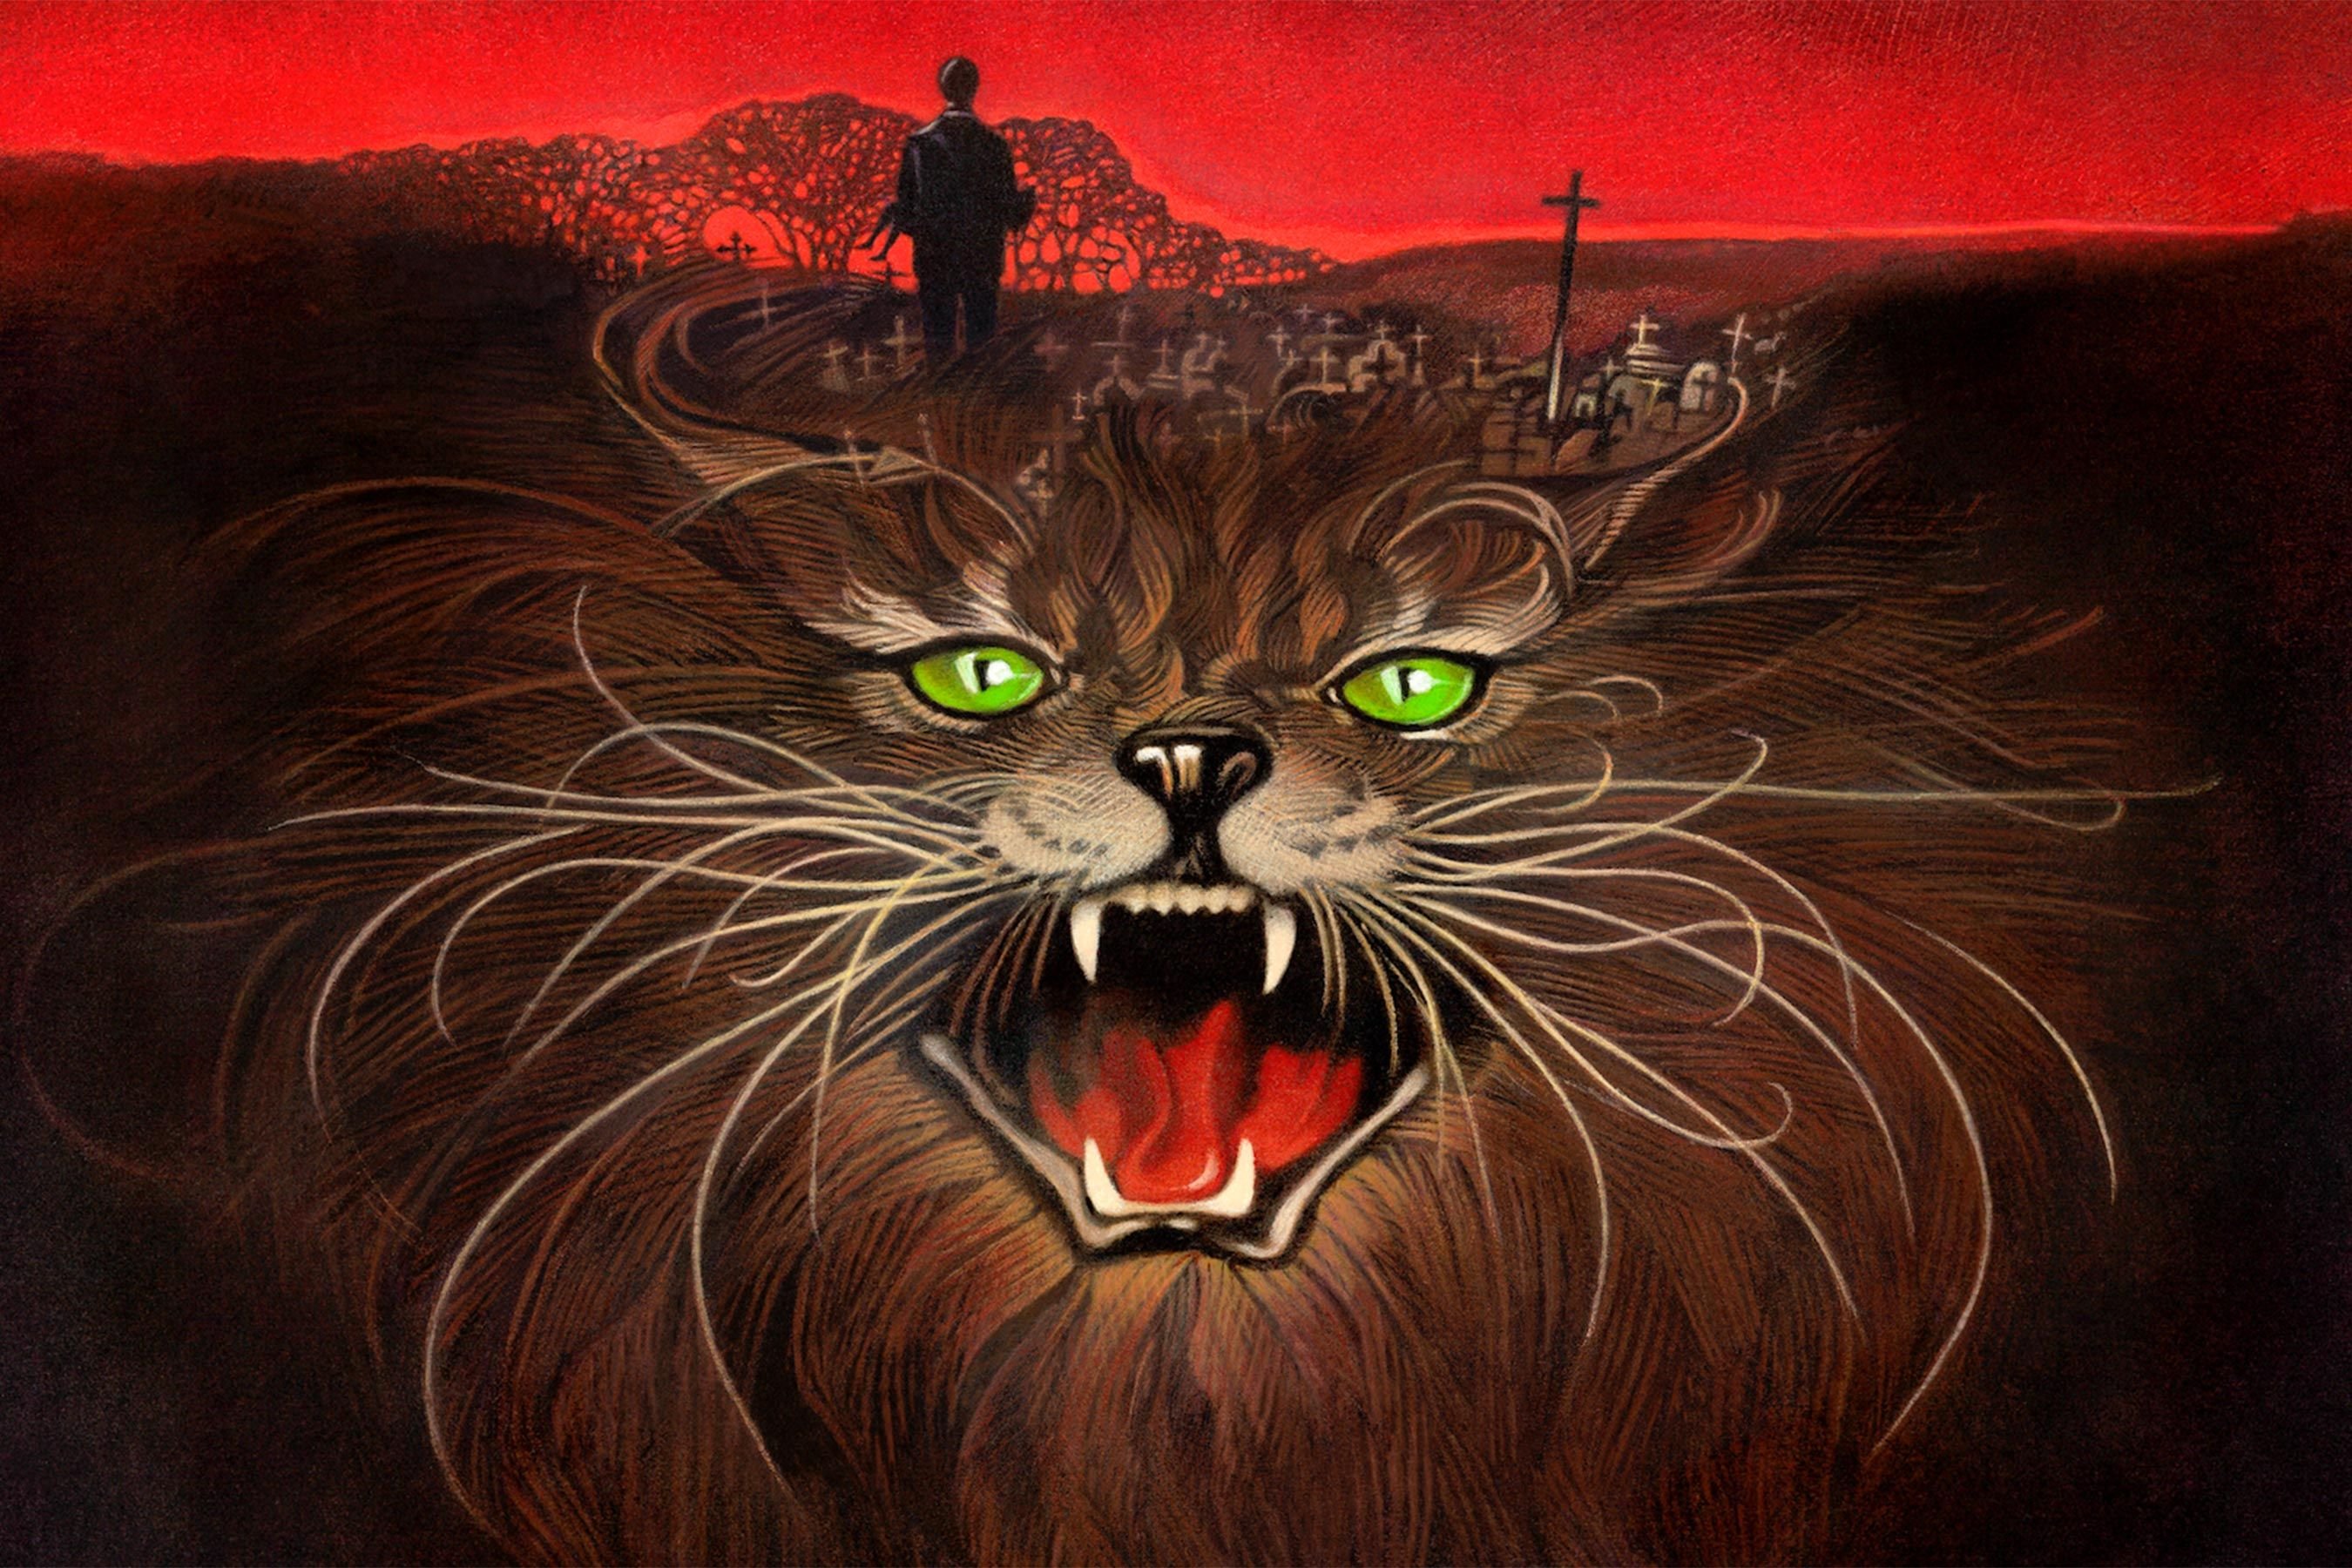 King pets. Pet Sematary Stephen King book Cover.